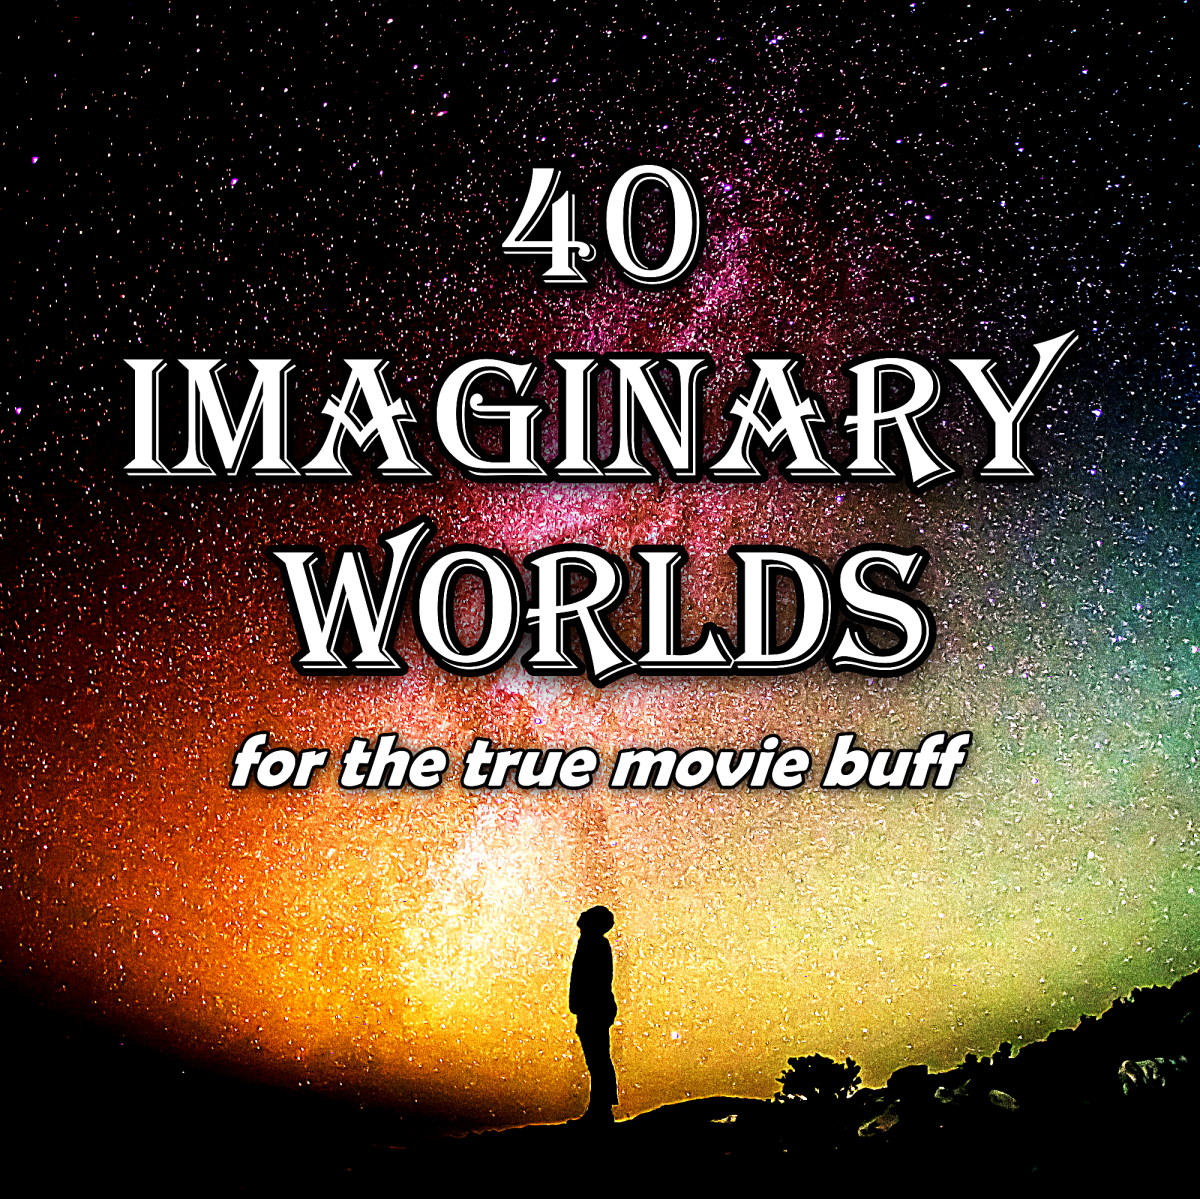 40 cinematic universes for movie buffs to explore.